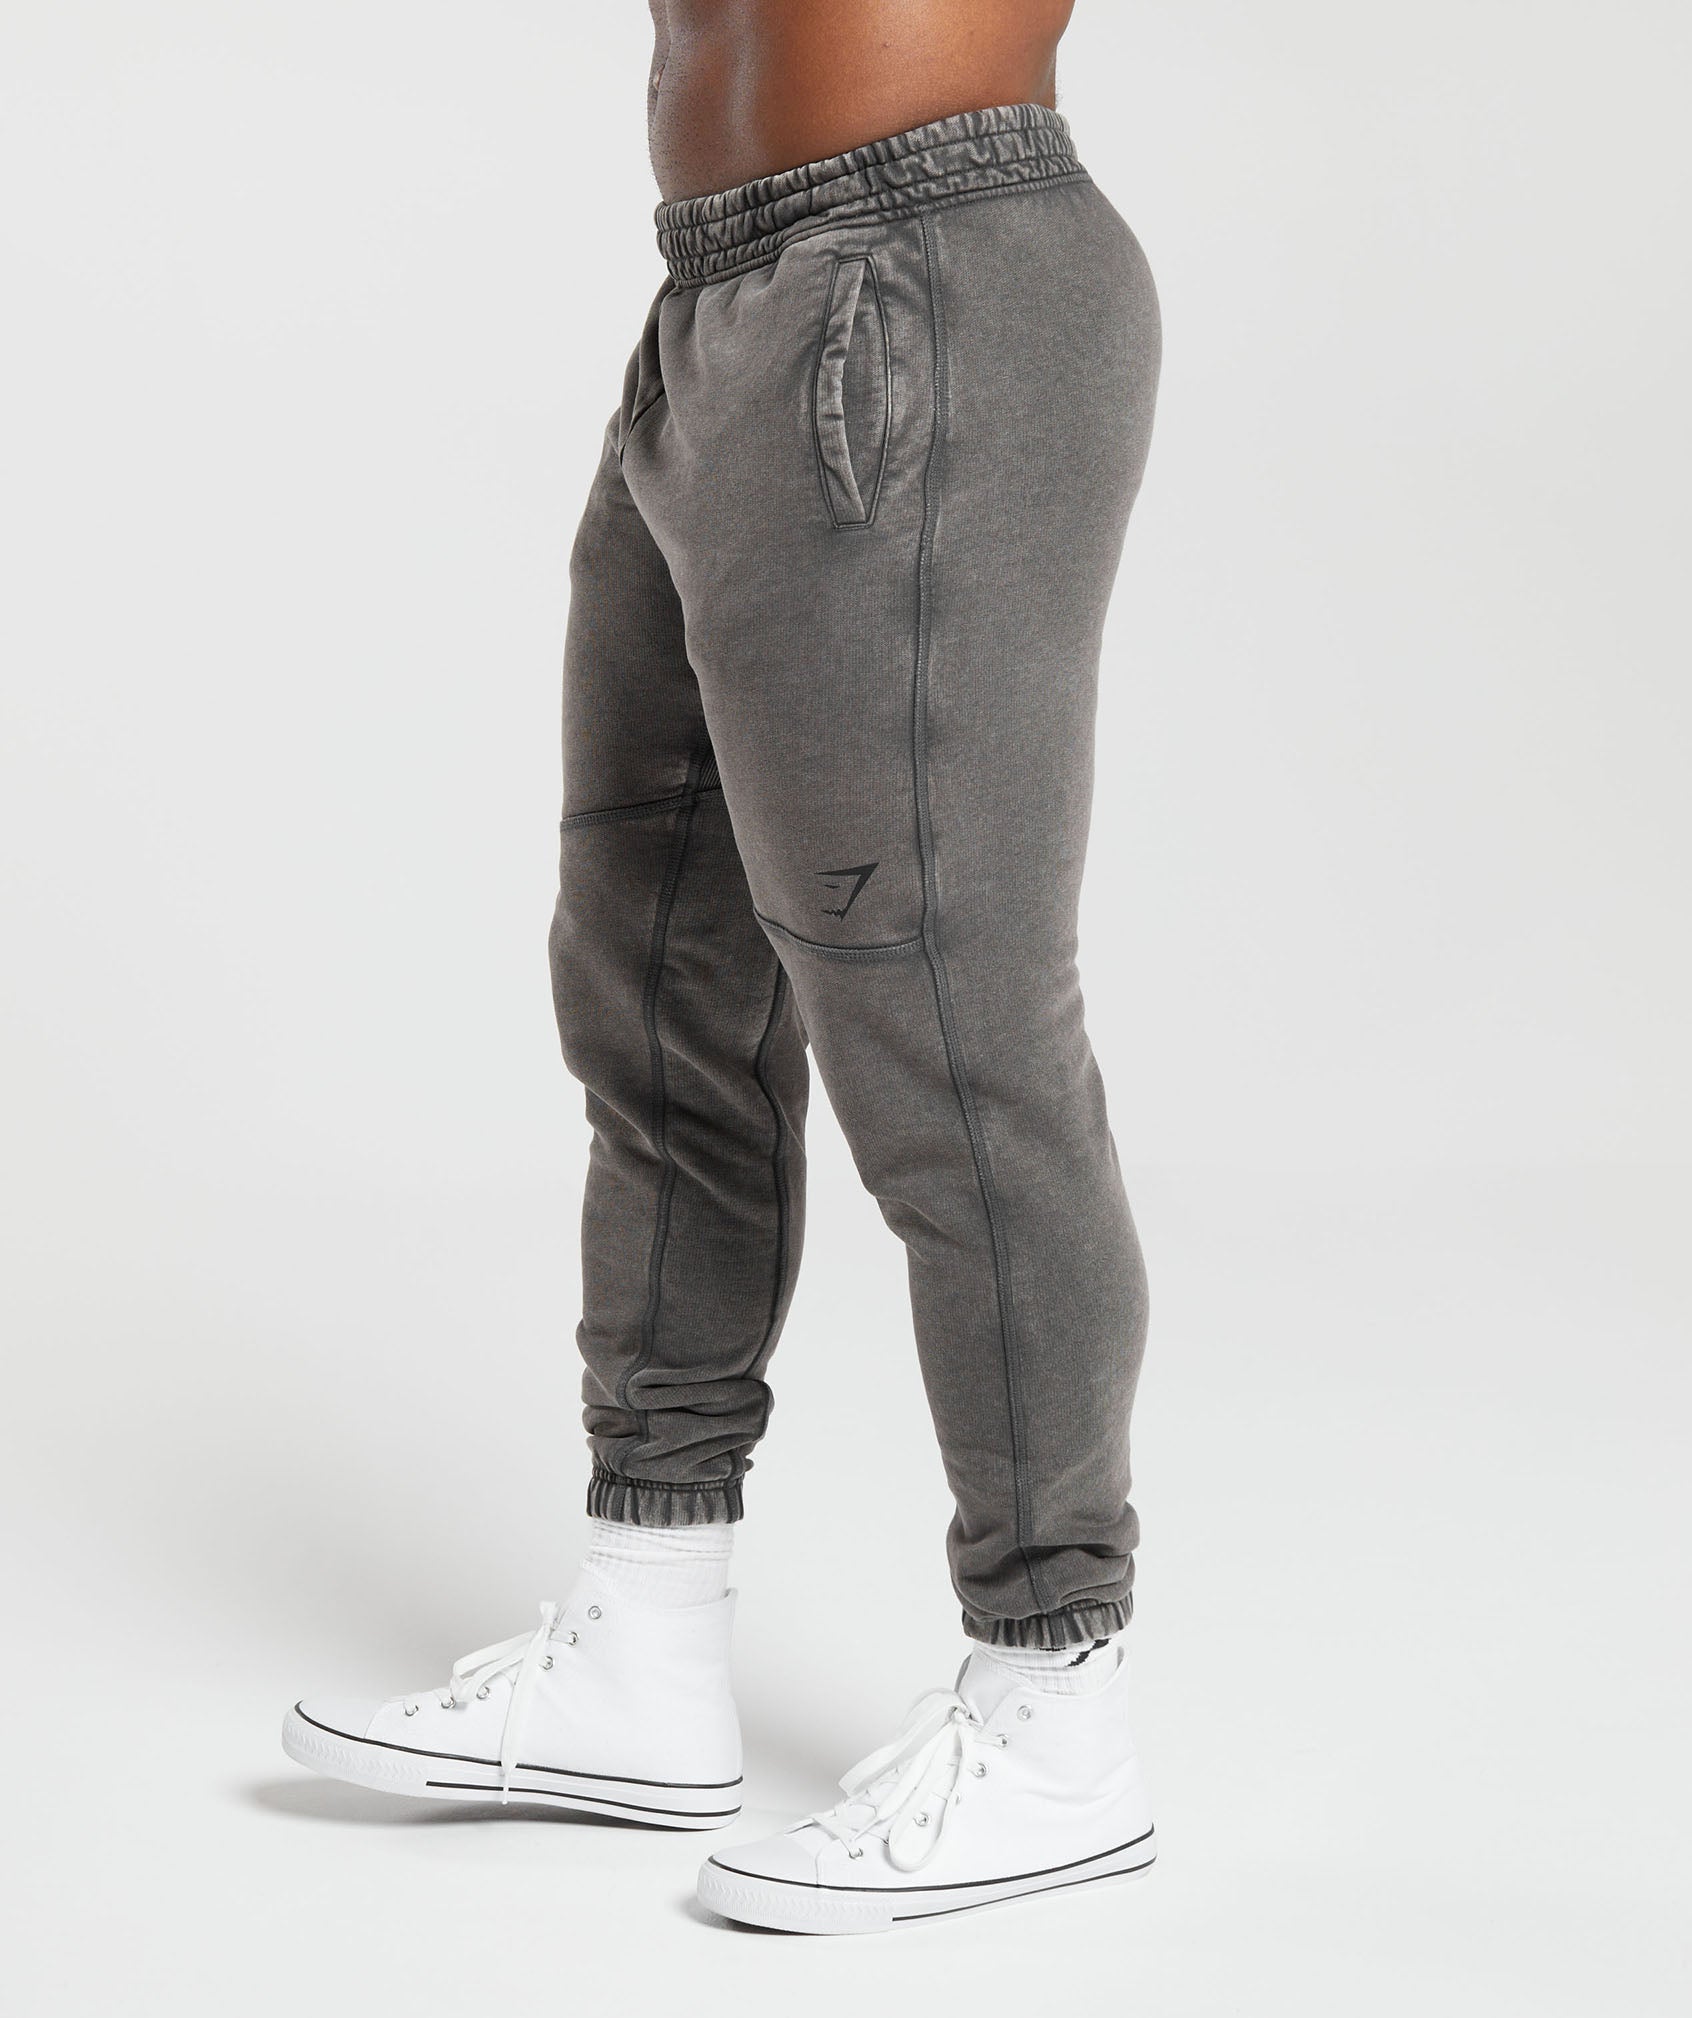 Heritage Joggers in Onyx Grey - view 3